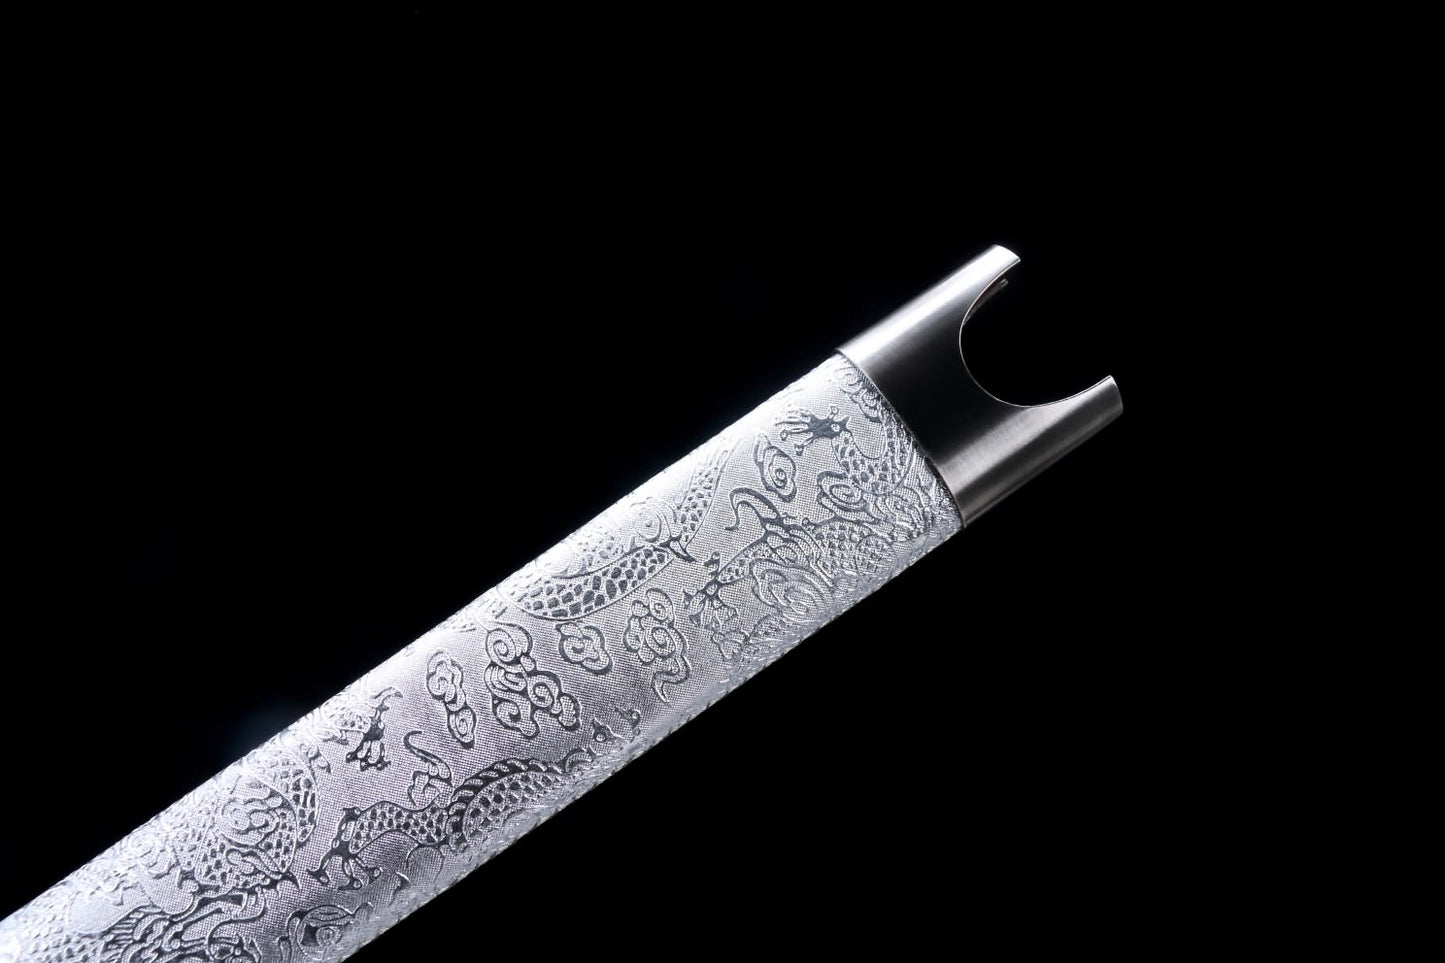 Dragon jian Swords Real,High Carbon Steel Blade,Black Scabbard,Alloy Fittings